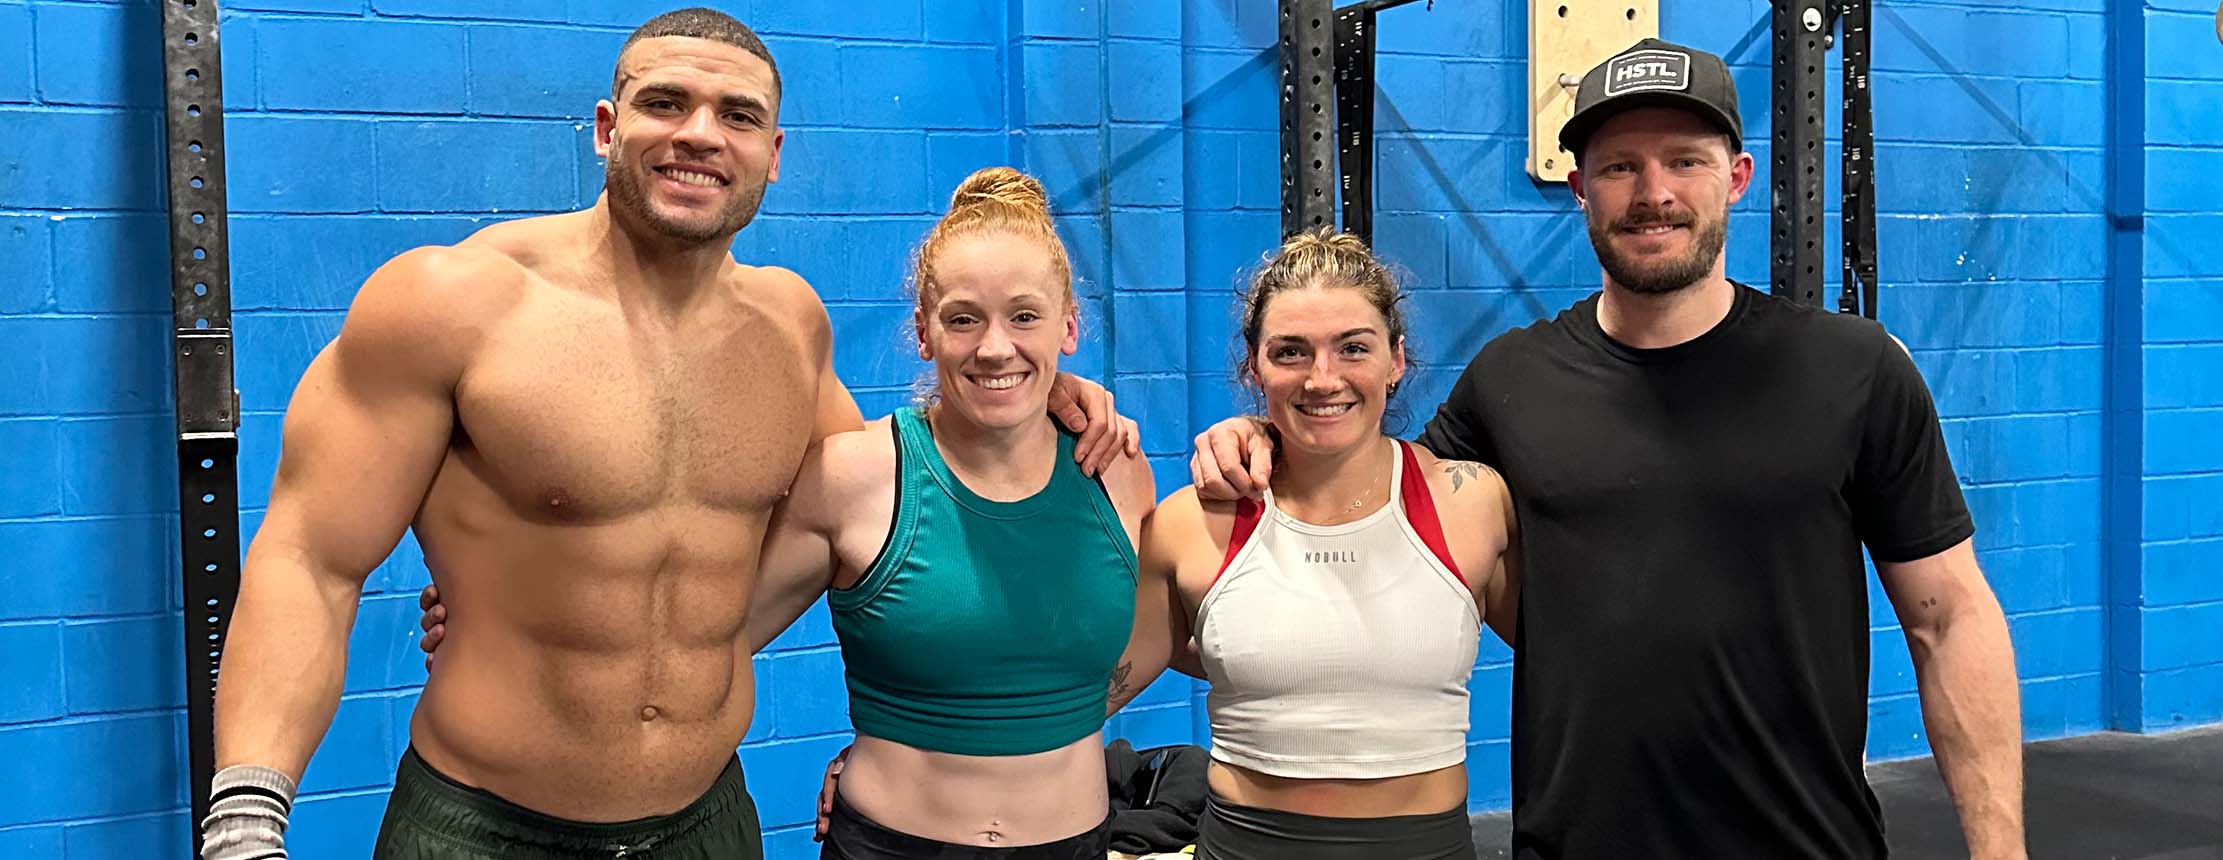 Zack george launches new uk team for 23 crossfit games season